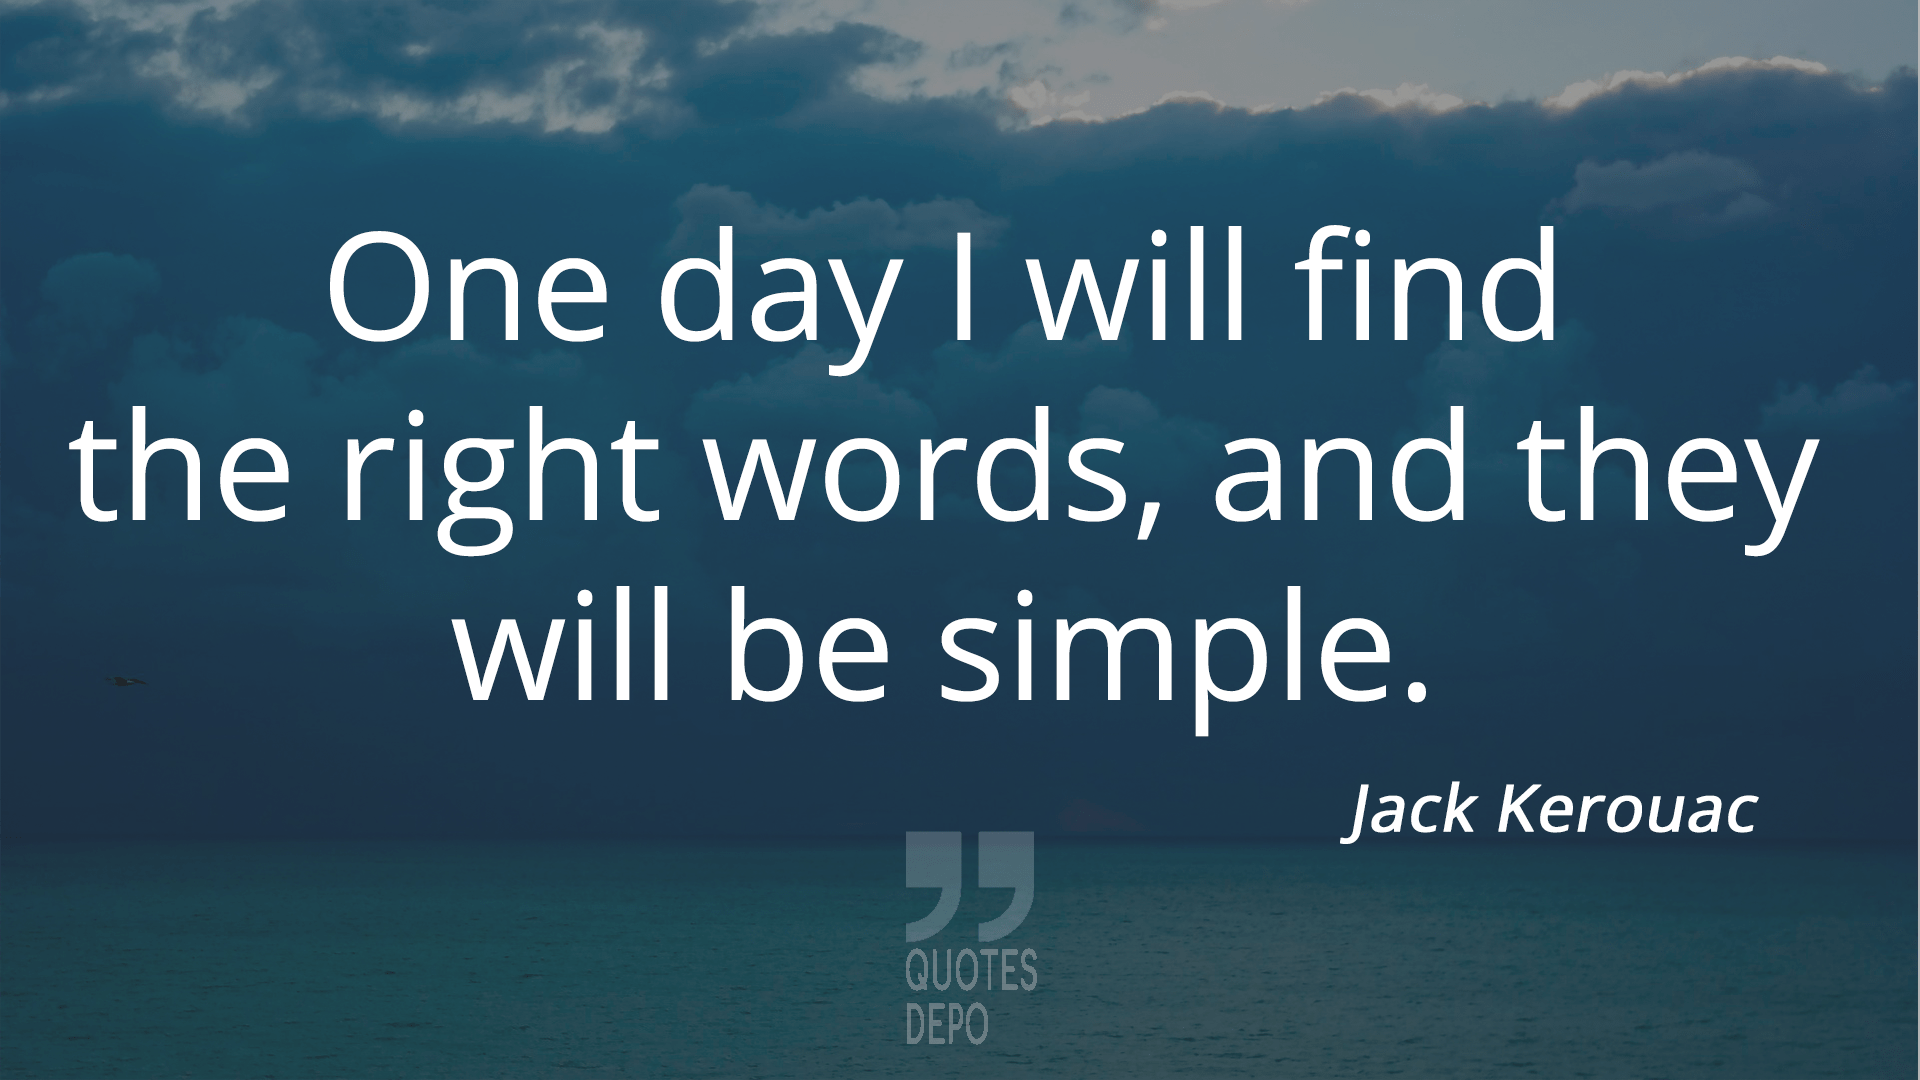 one day i will find the right words and they will be simple - jack kerouac quotes